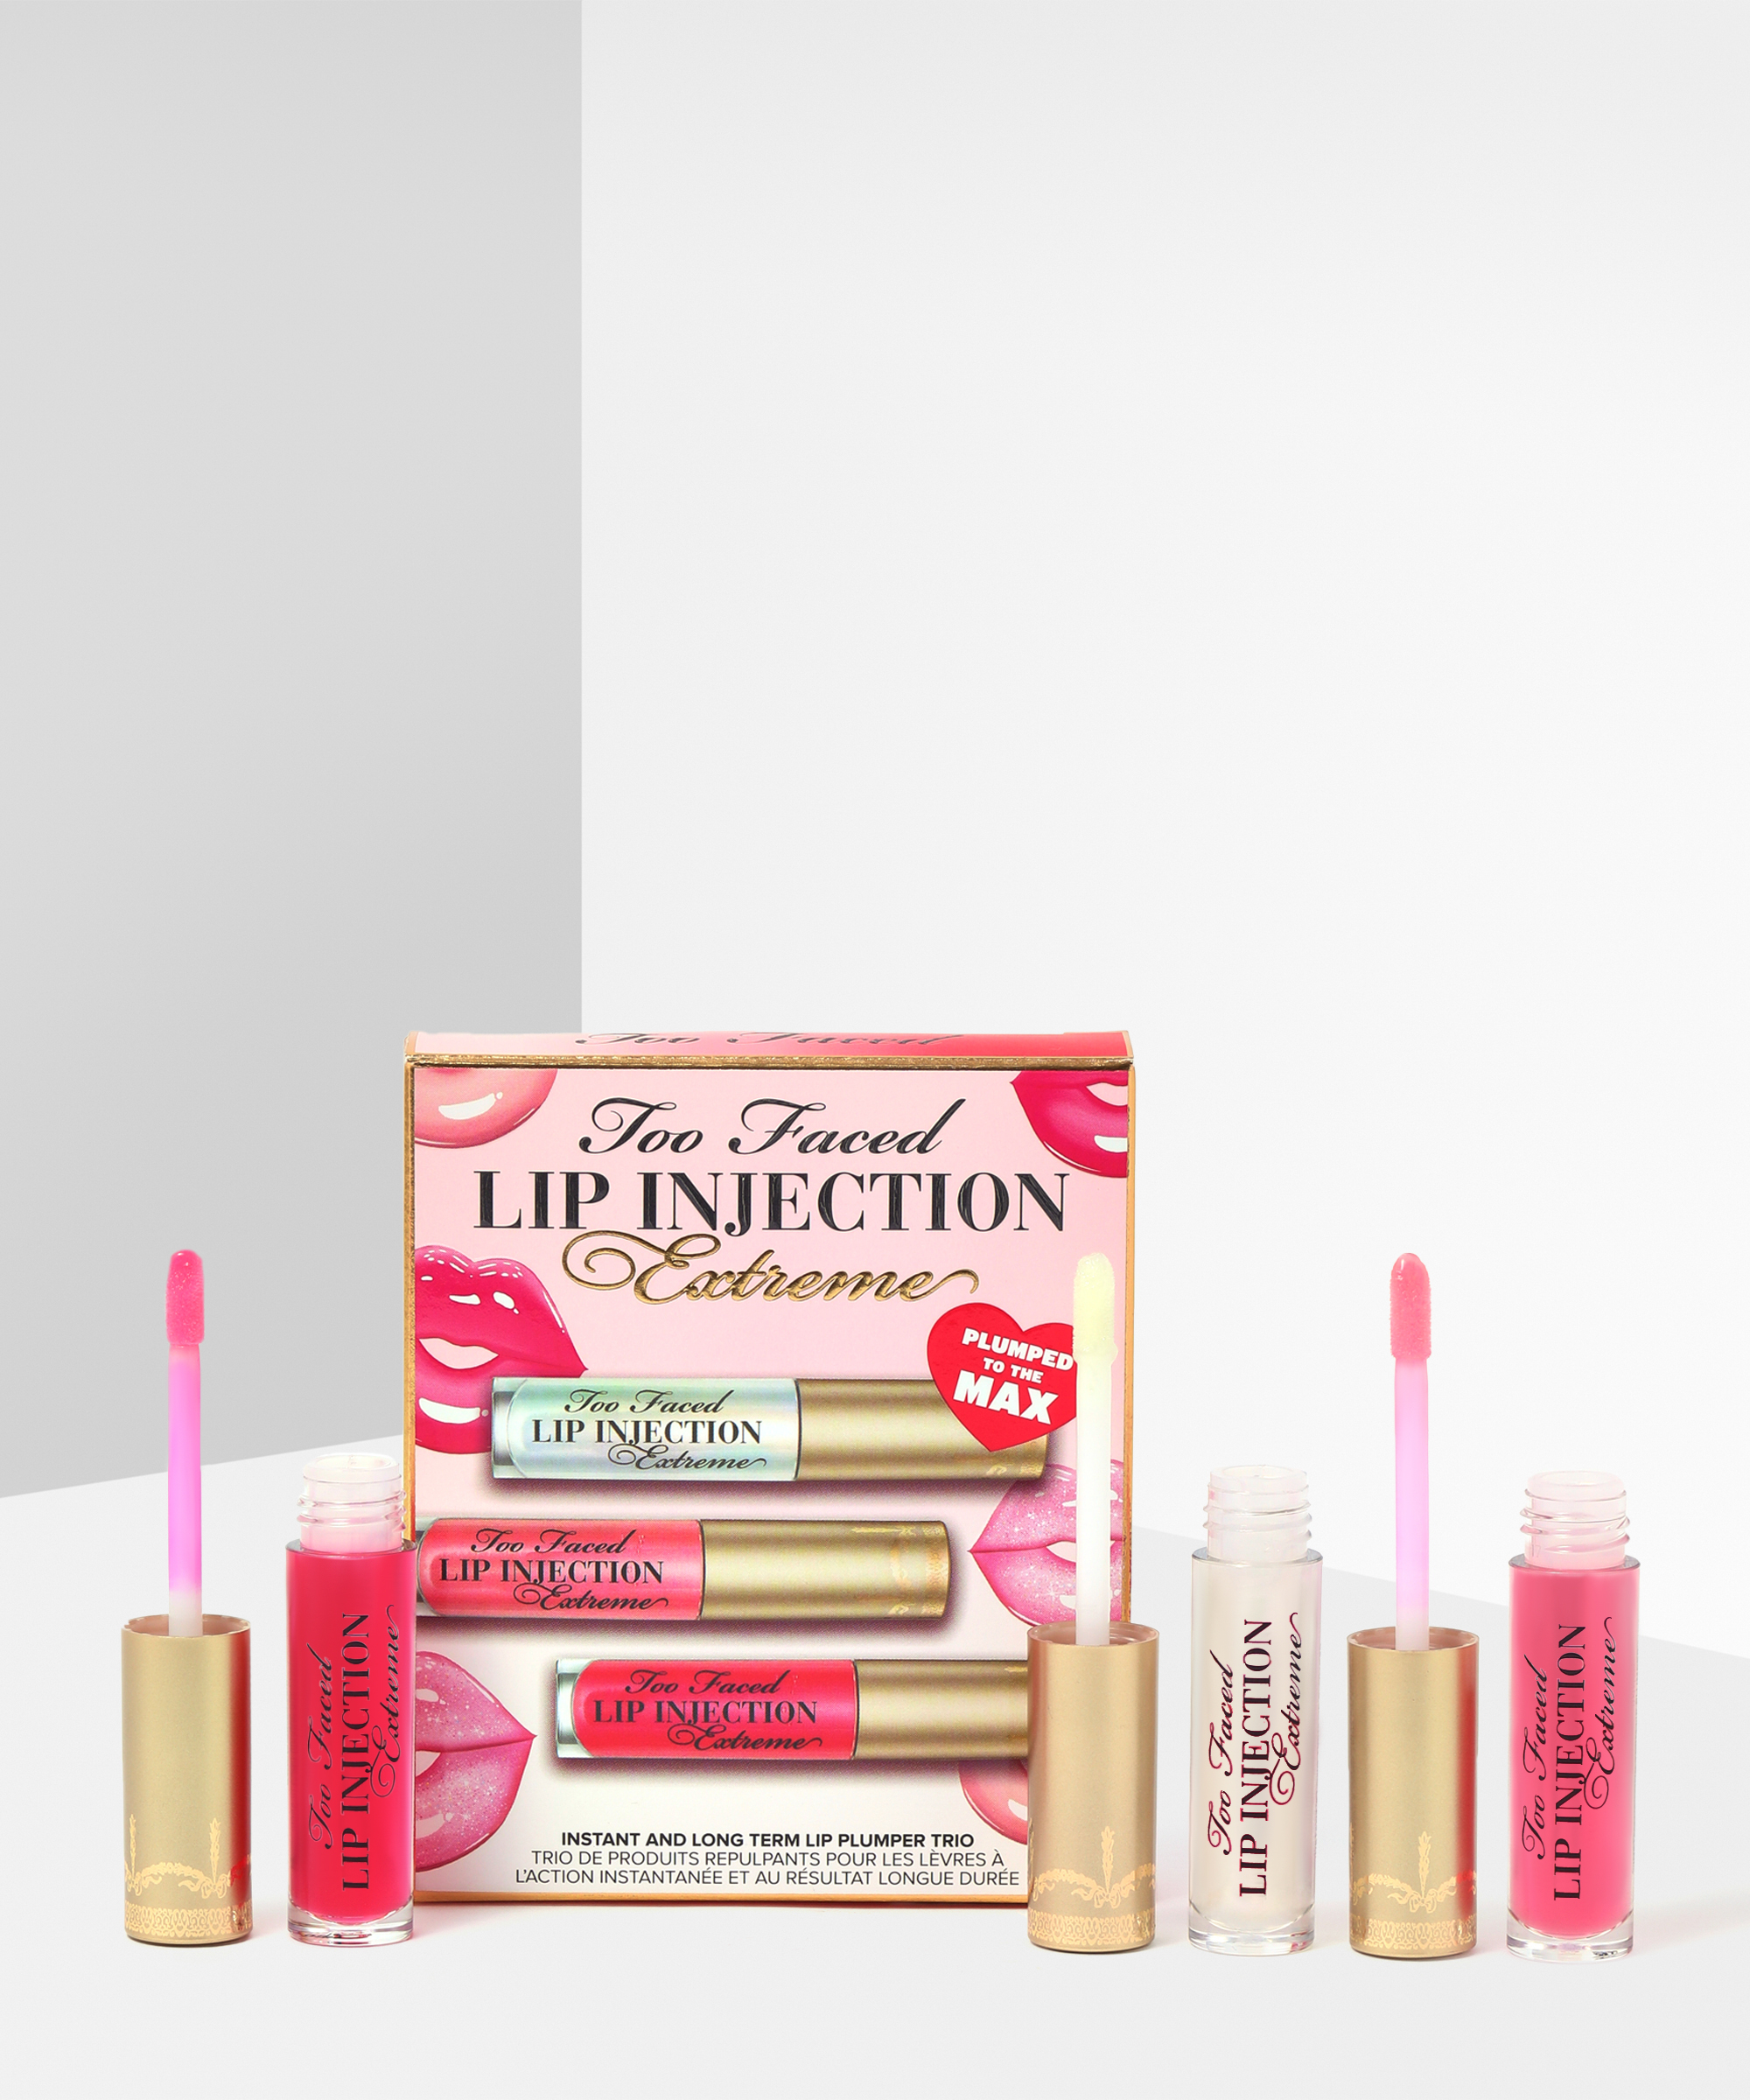 Too Faced Lip Injection Extreme Plumped To The Max Set at BEAUTY BAY